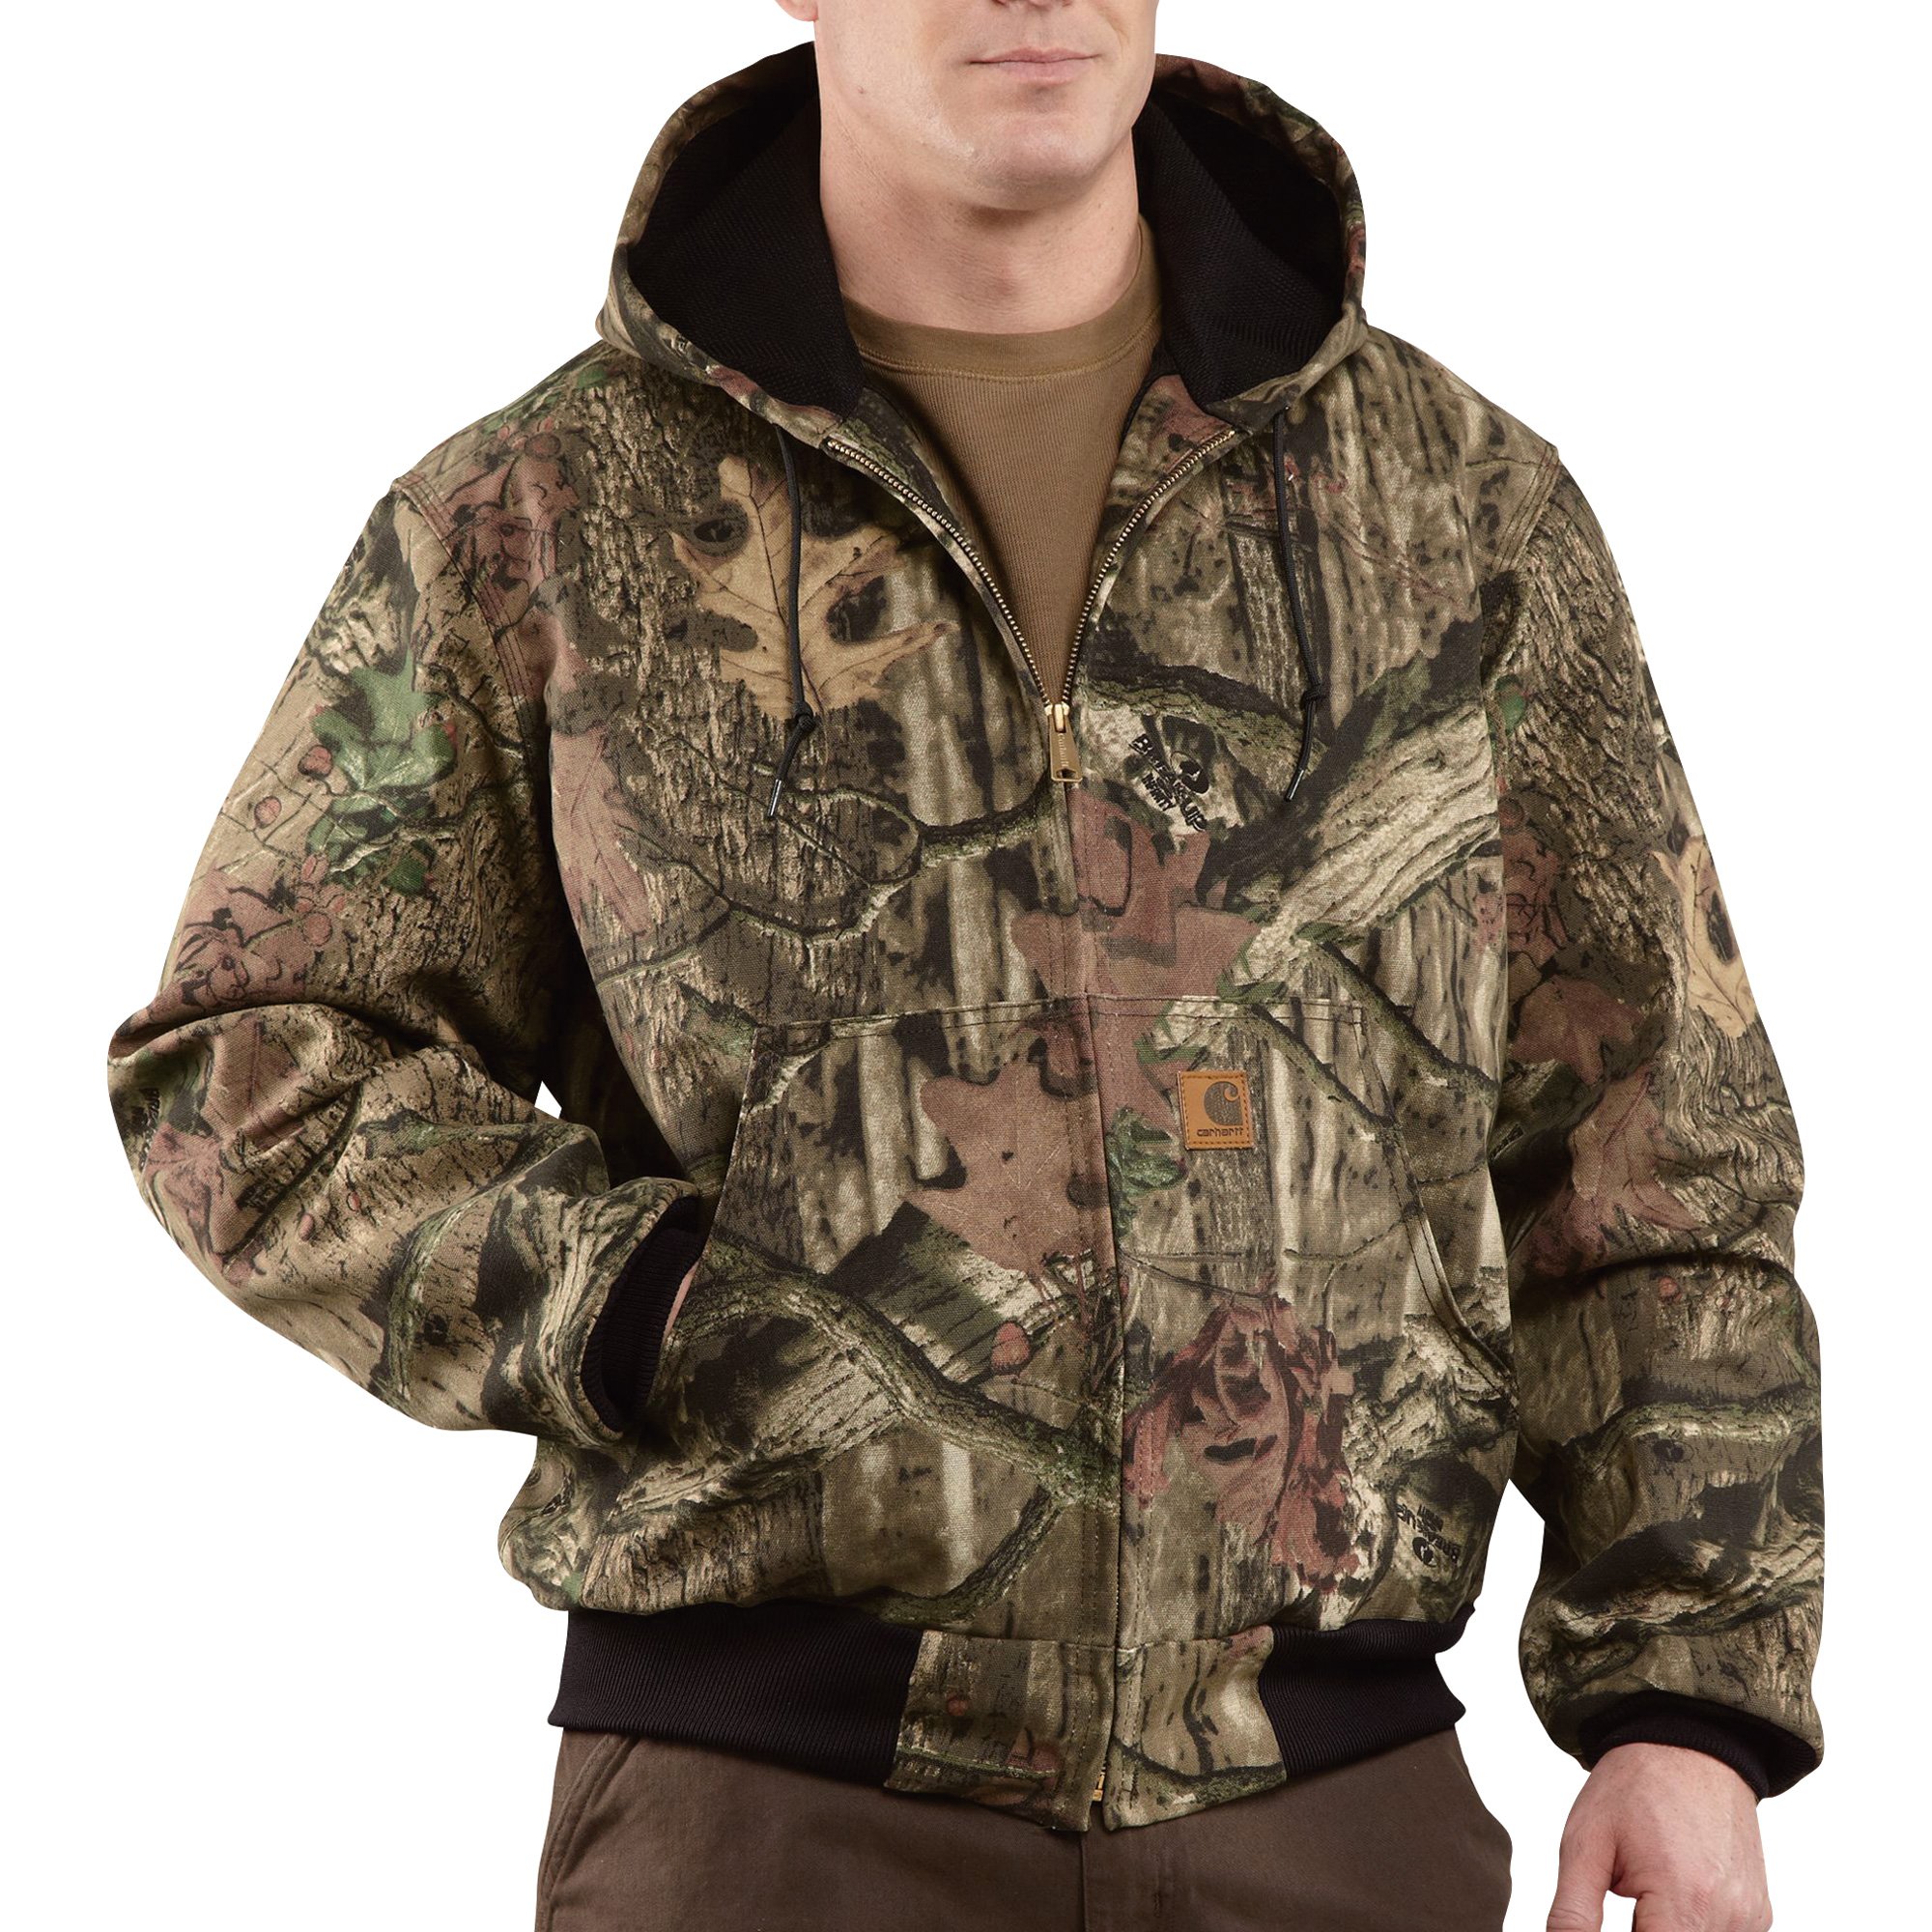 Carhartt Men's Quilted Flannel-Lined Camo Active Jacket - Realtree Large, Model# J221 | Northern Tool